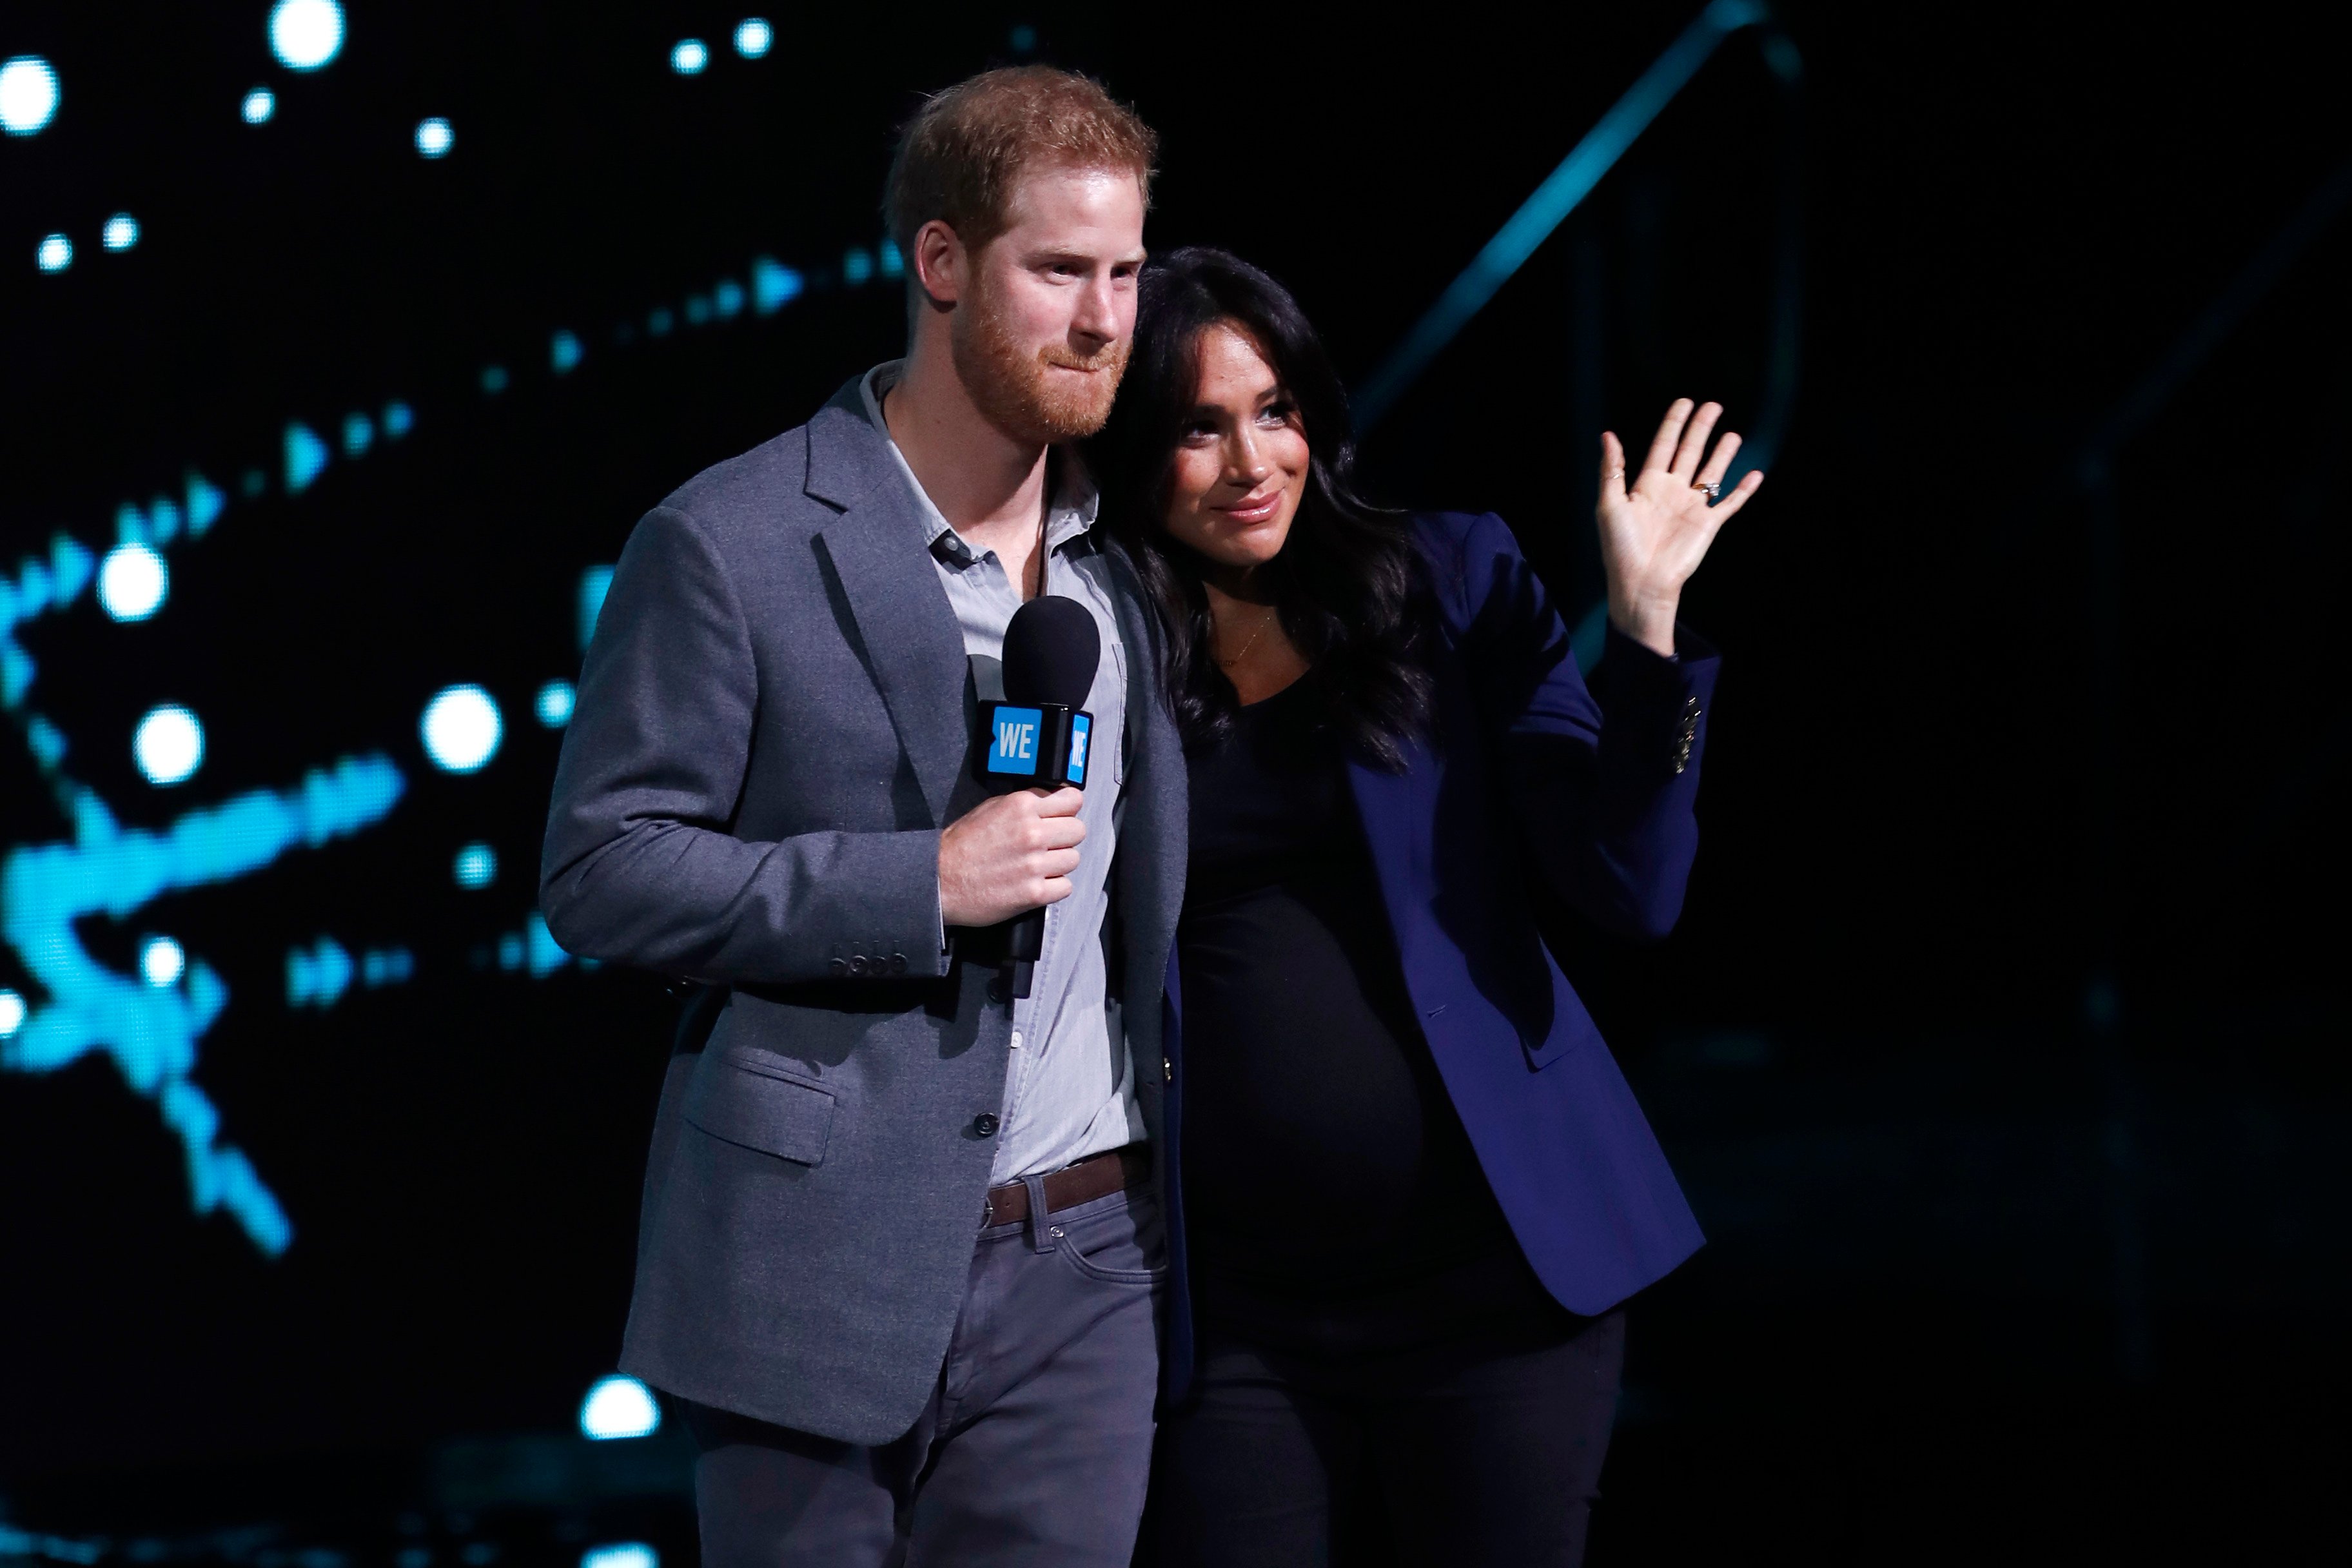 Prince Harry and Meghan Markle at WE Day UK 2019